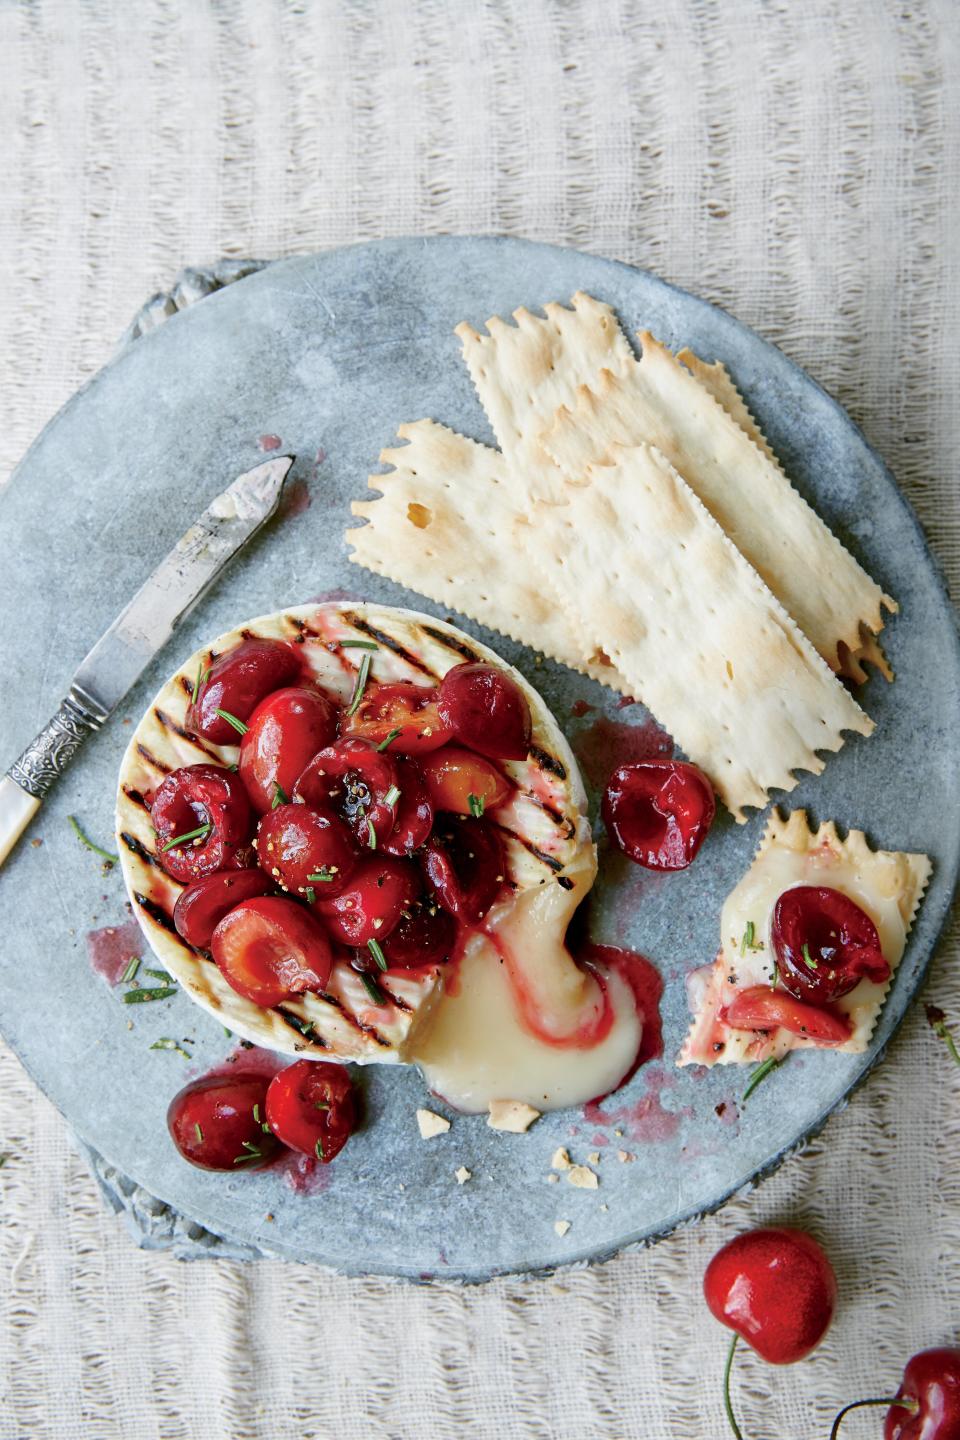 Grilled Camembert with Macerated Cherries and Rosemary